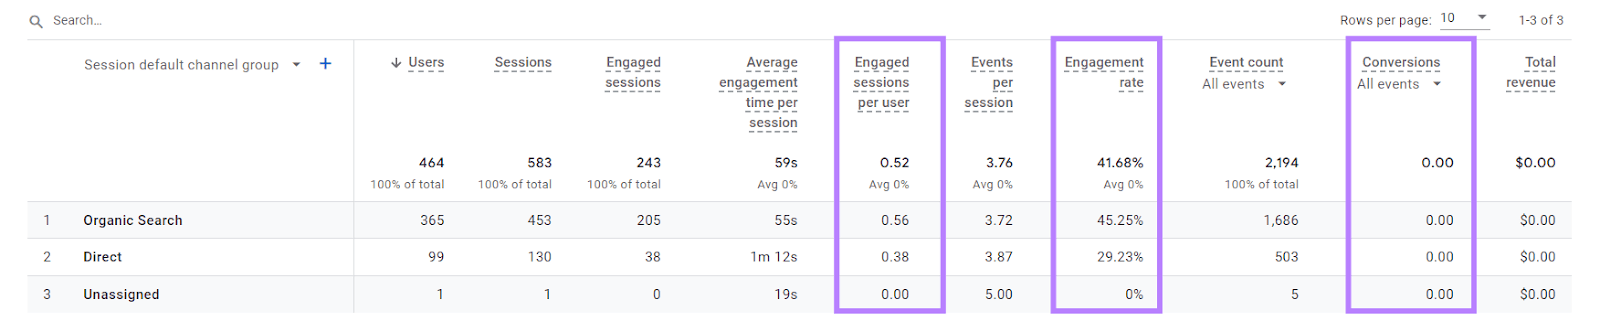 "Engaged sessions per user," "Engagement rate," and "Conversions" metrics